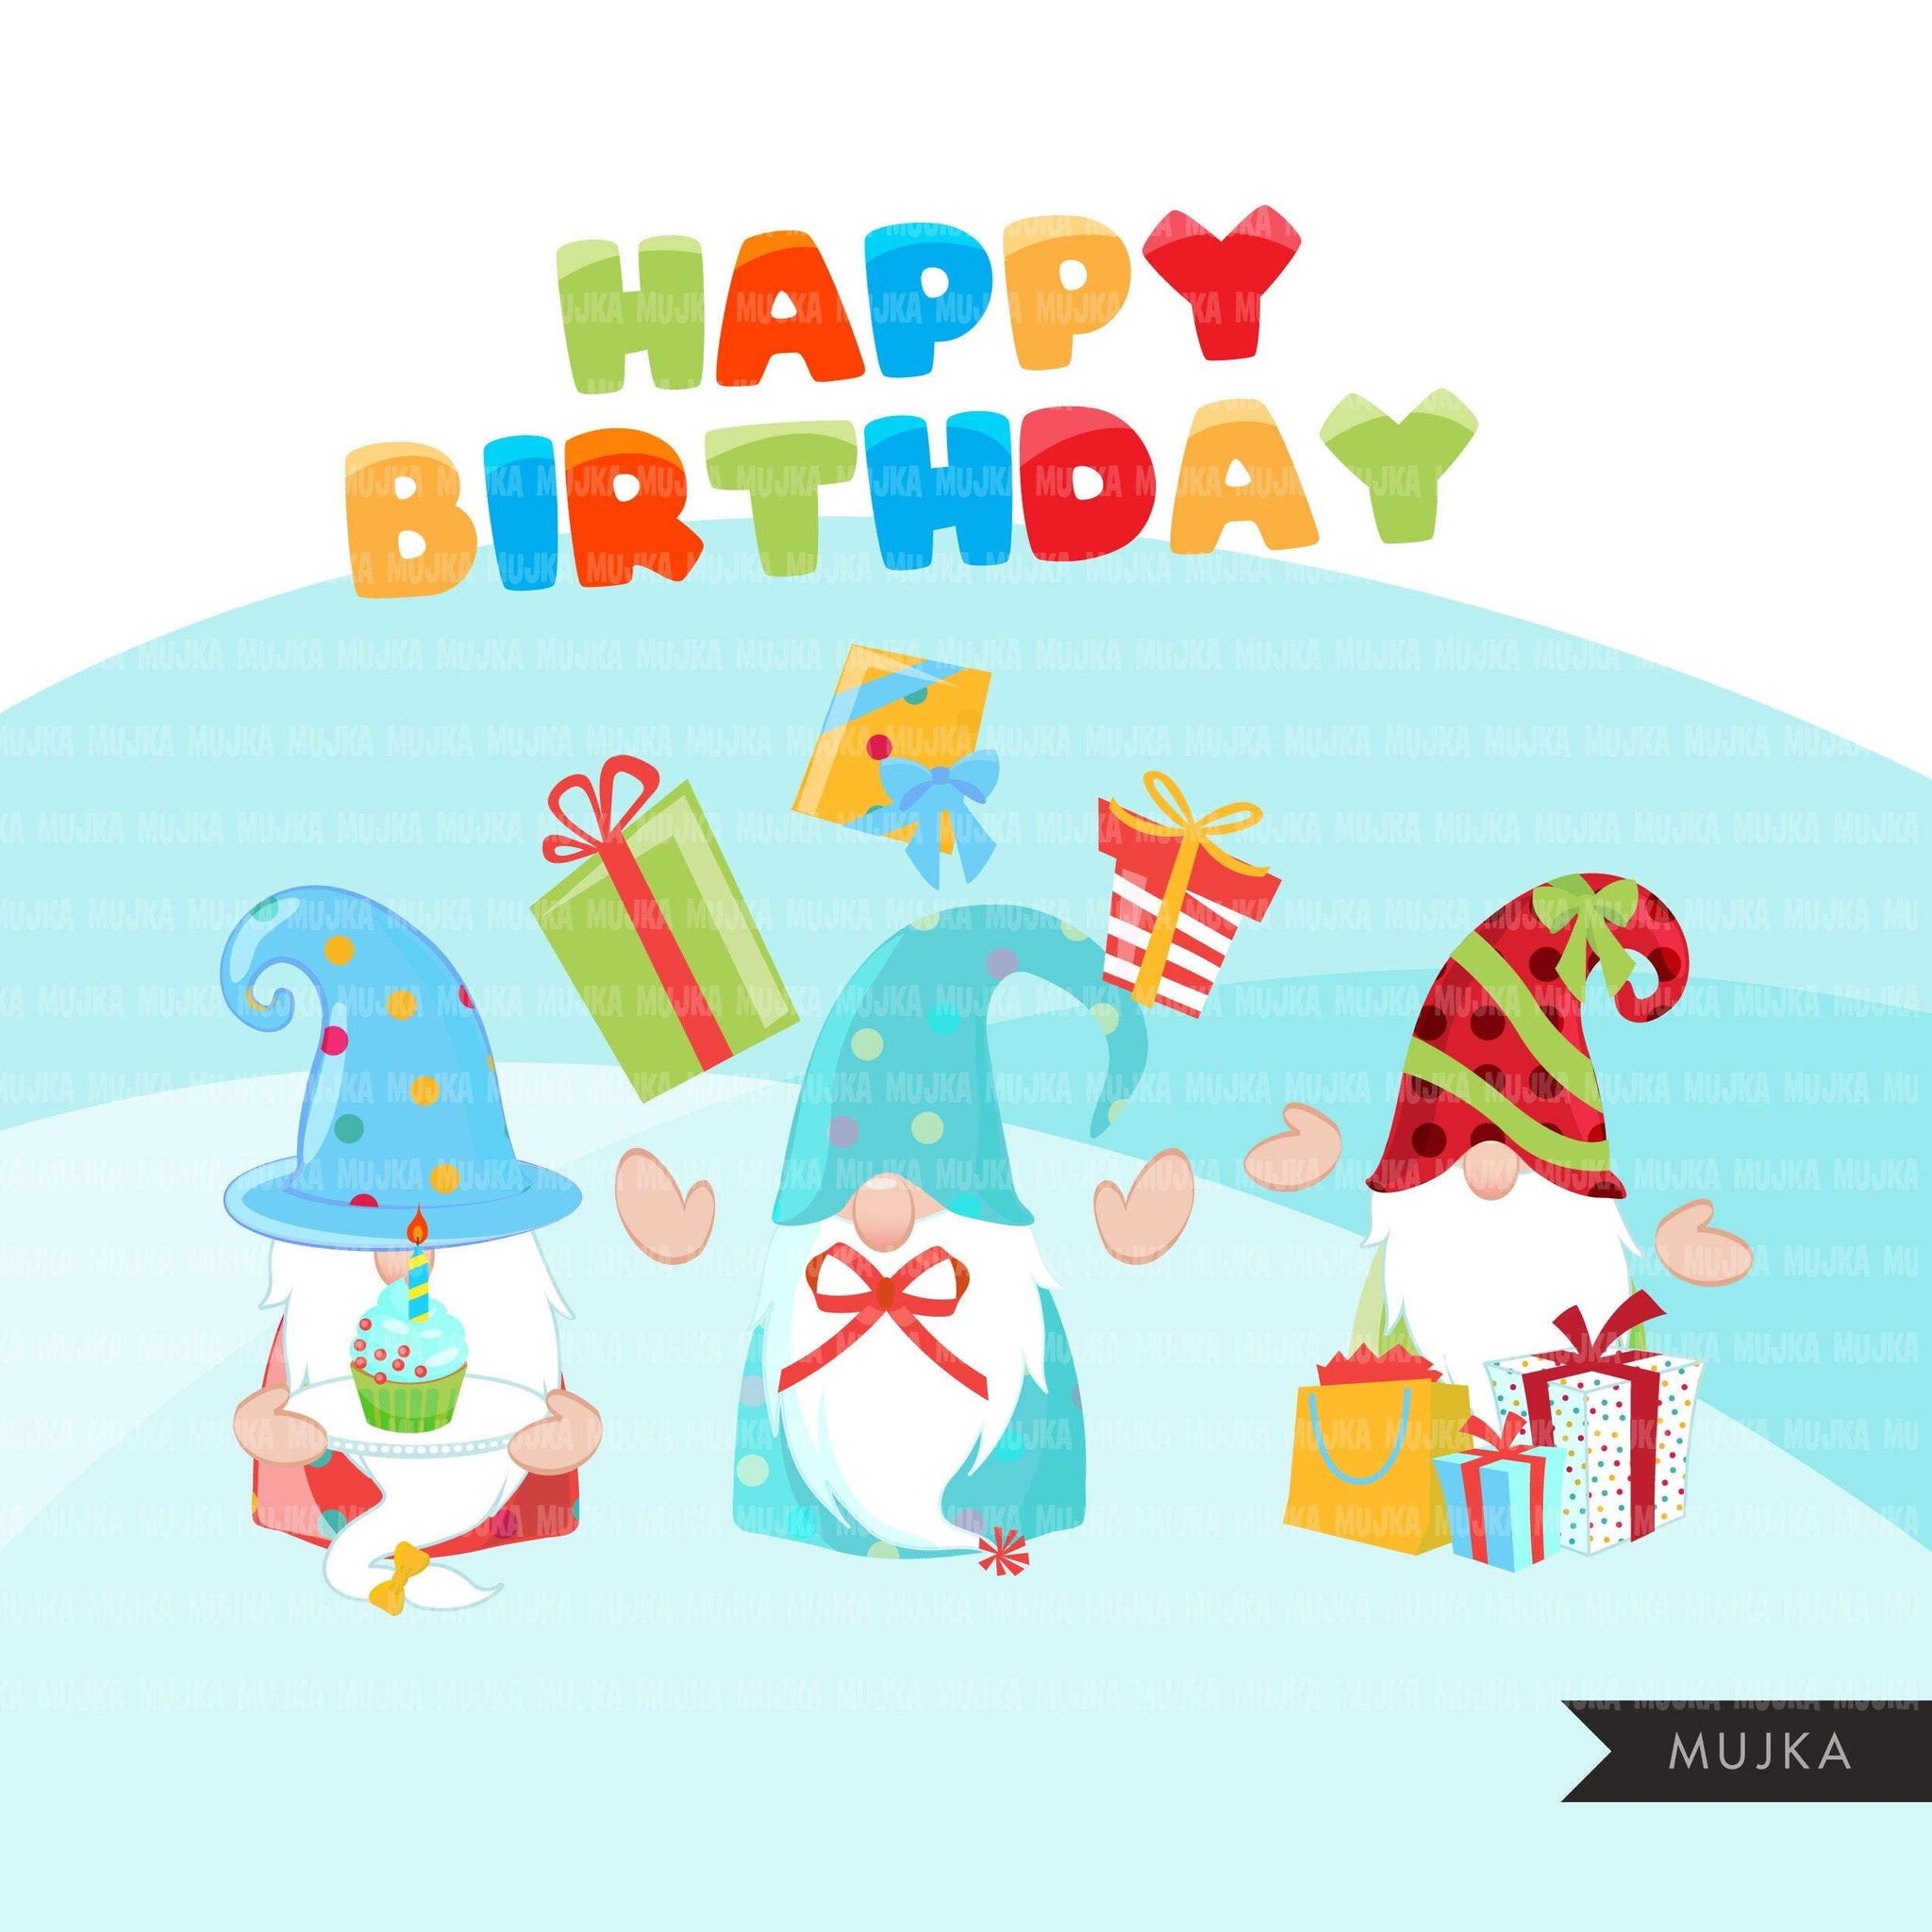 Birthday gnomes Clipart, birthday graphics, colorful party Gnome graphics, png digital sublimation designs